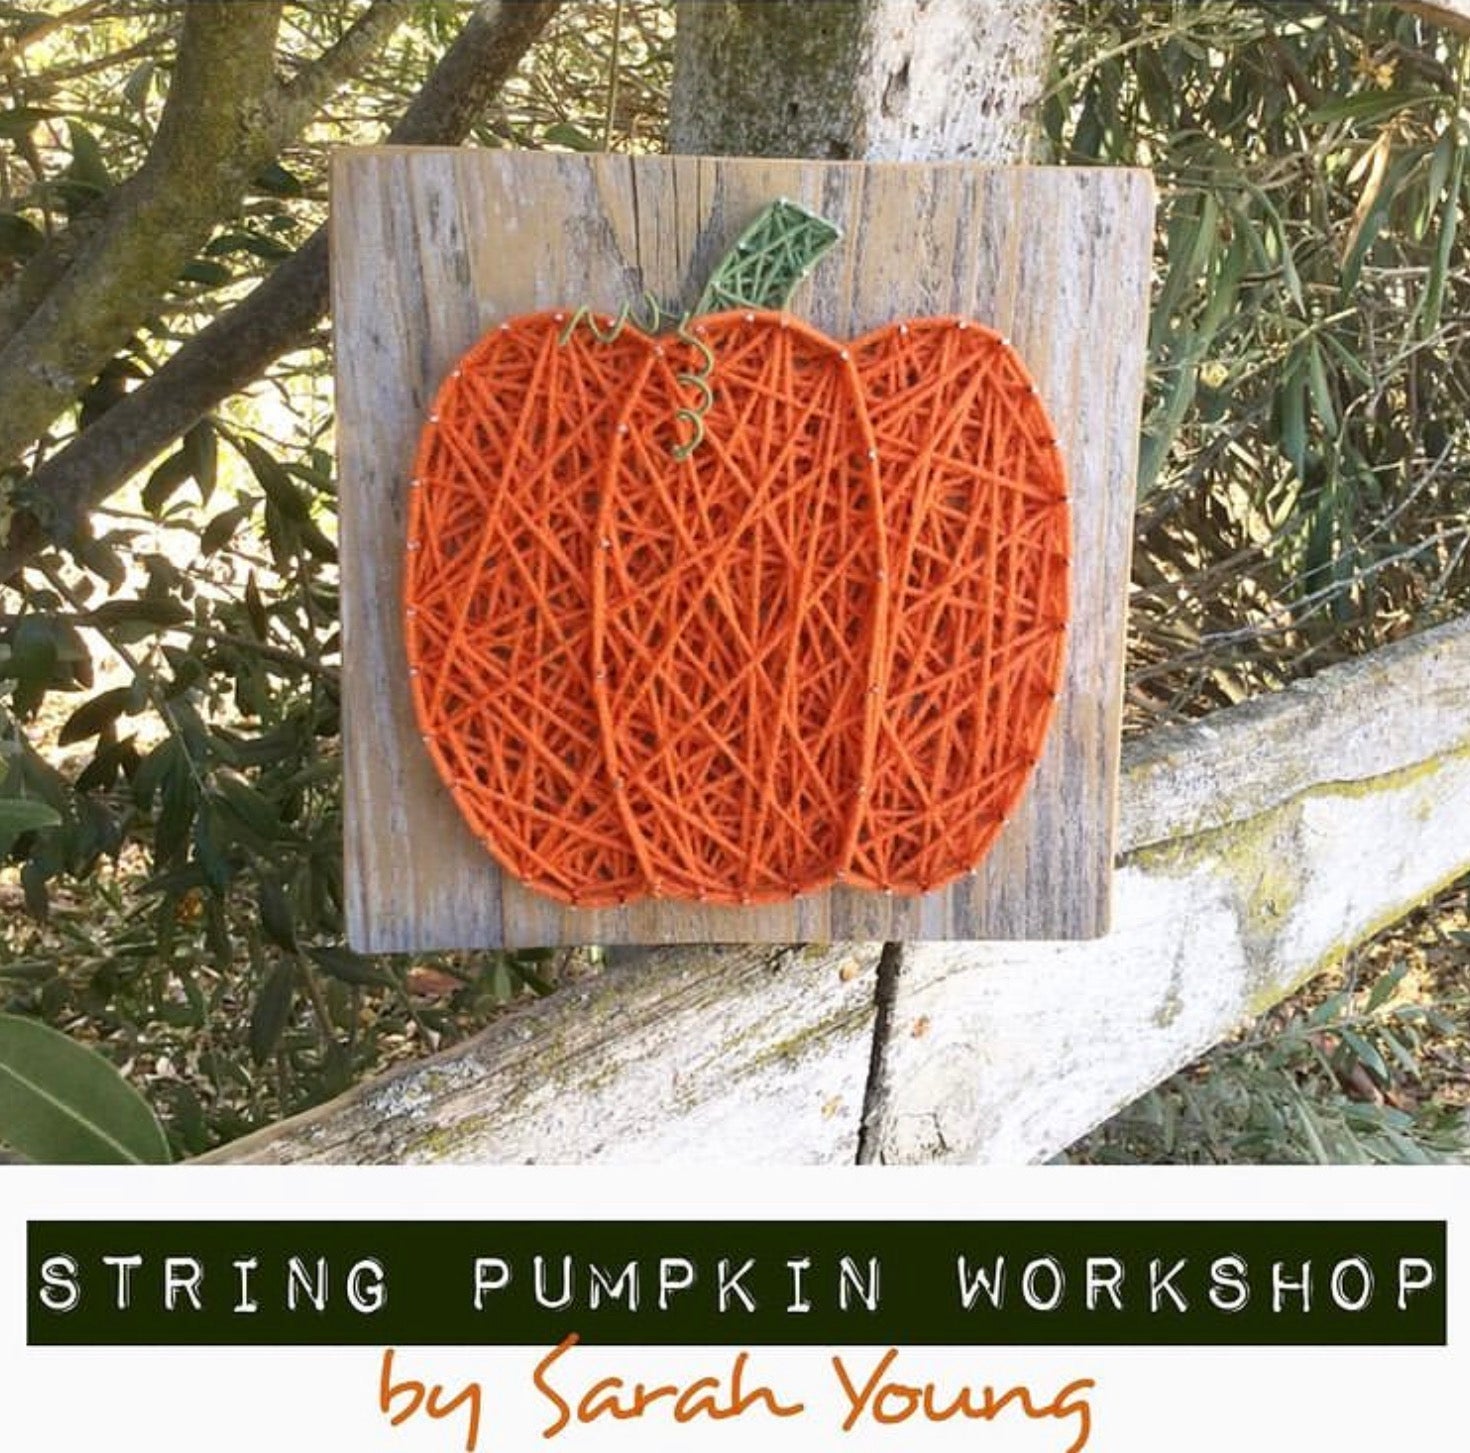 String Pumpkin Workshop: Tuesday, October 17th 6 - 8:00pm with Sarah Young